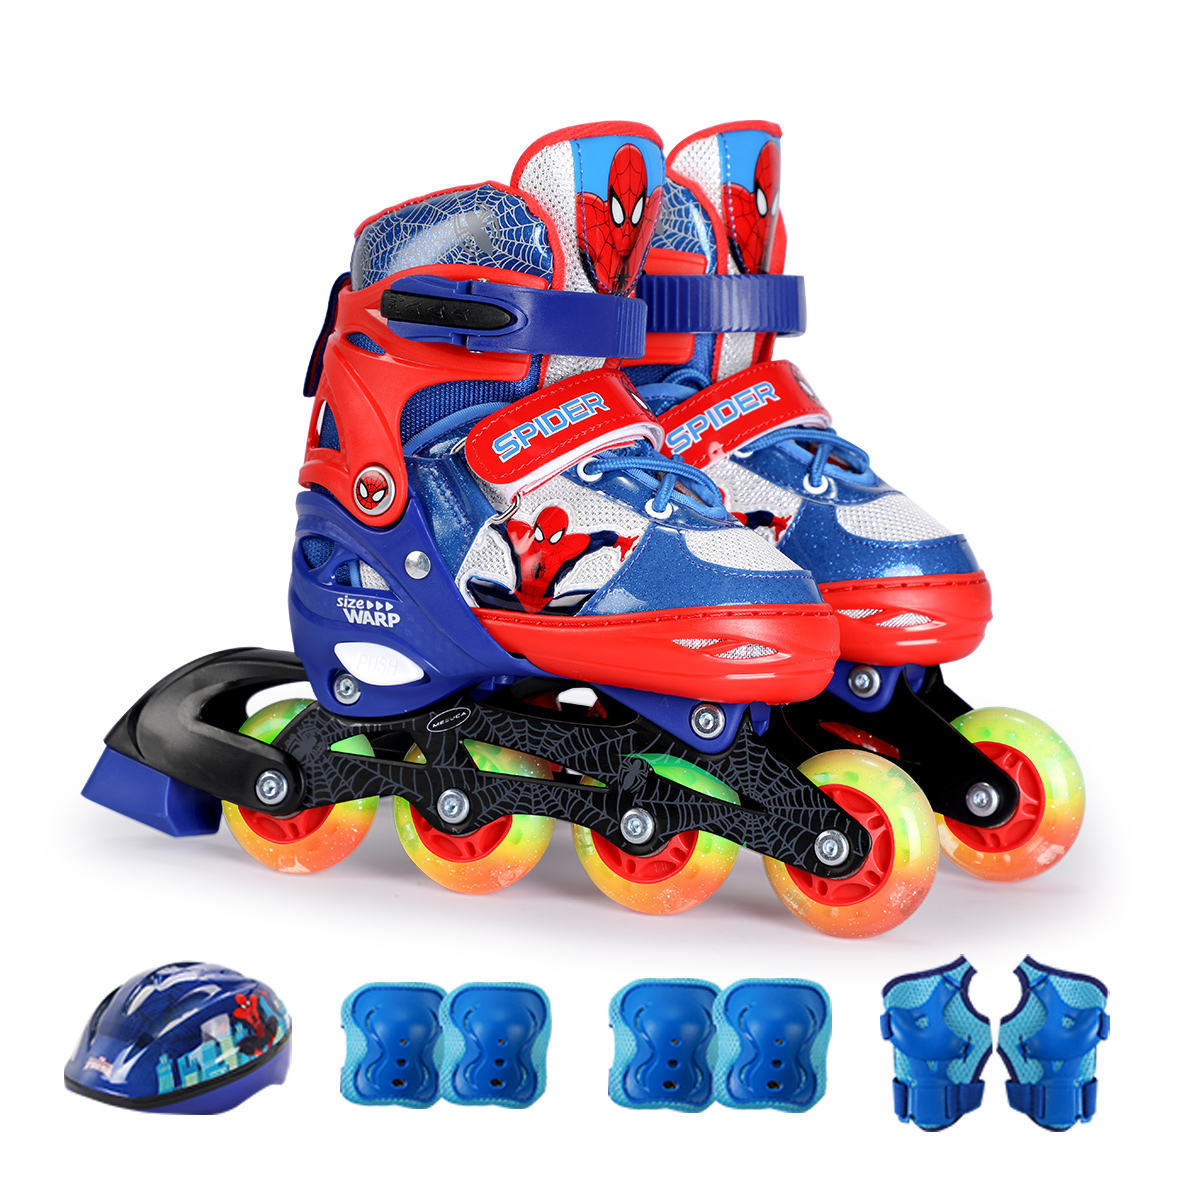 Disney Children's Inline Skate and Protective Gear 41037